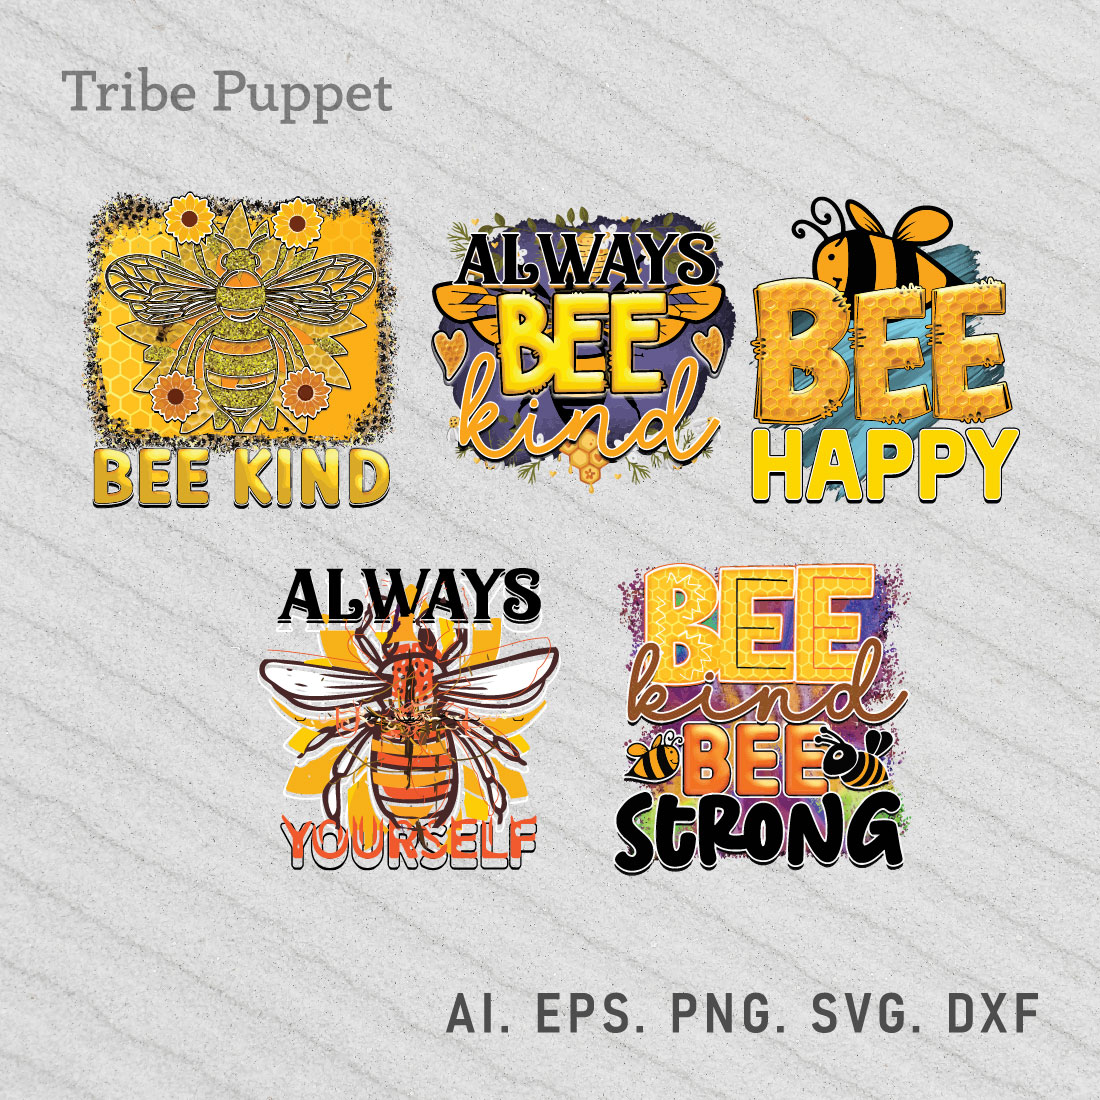 Set of four different types of bees.